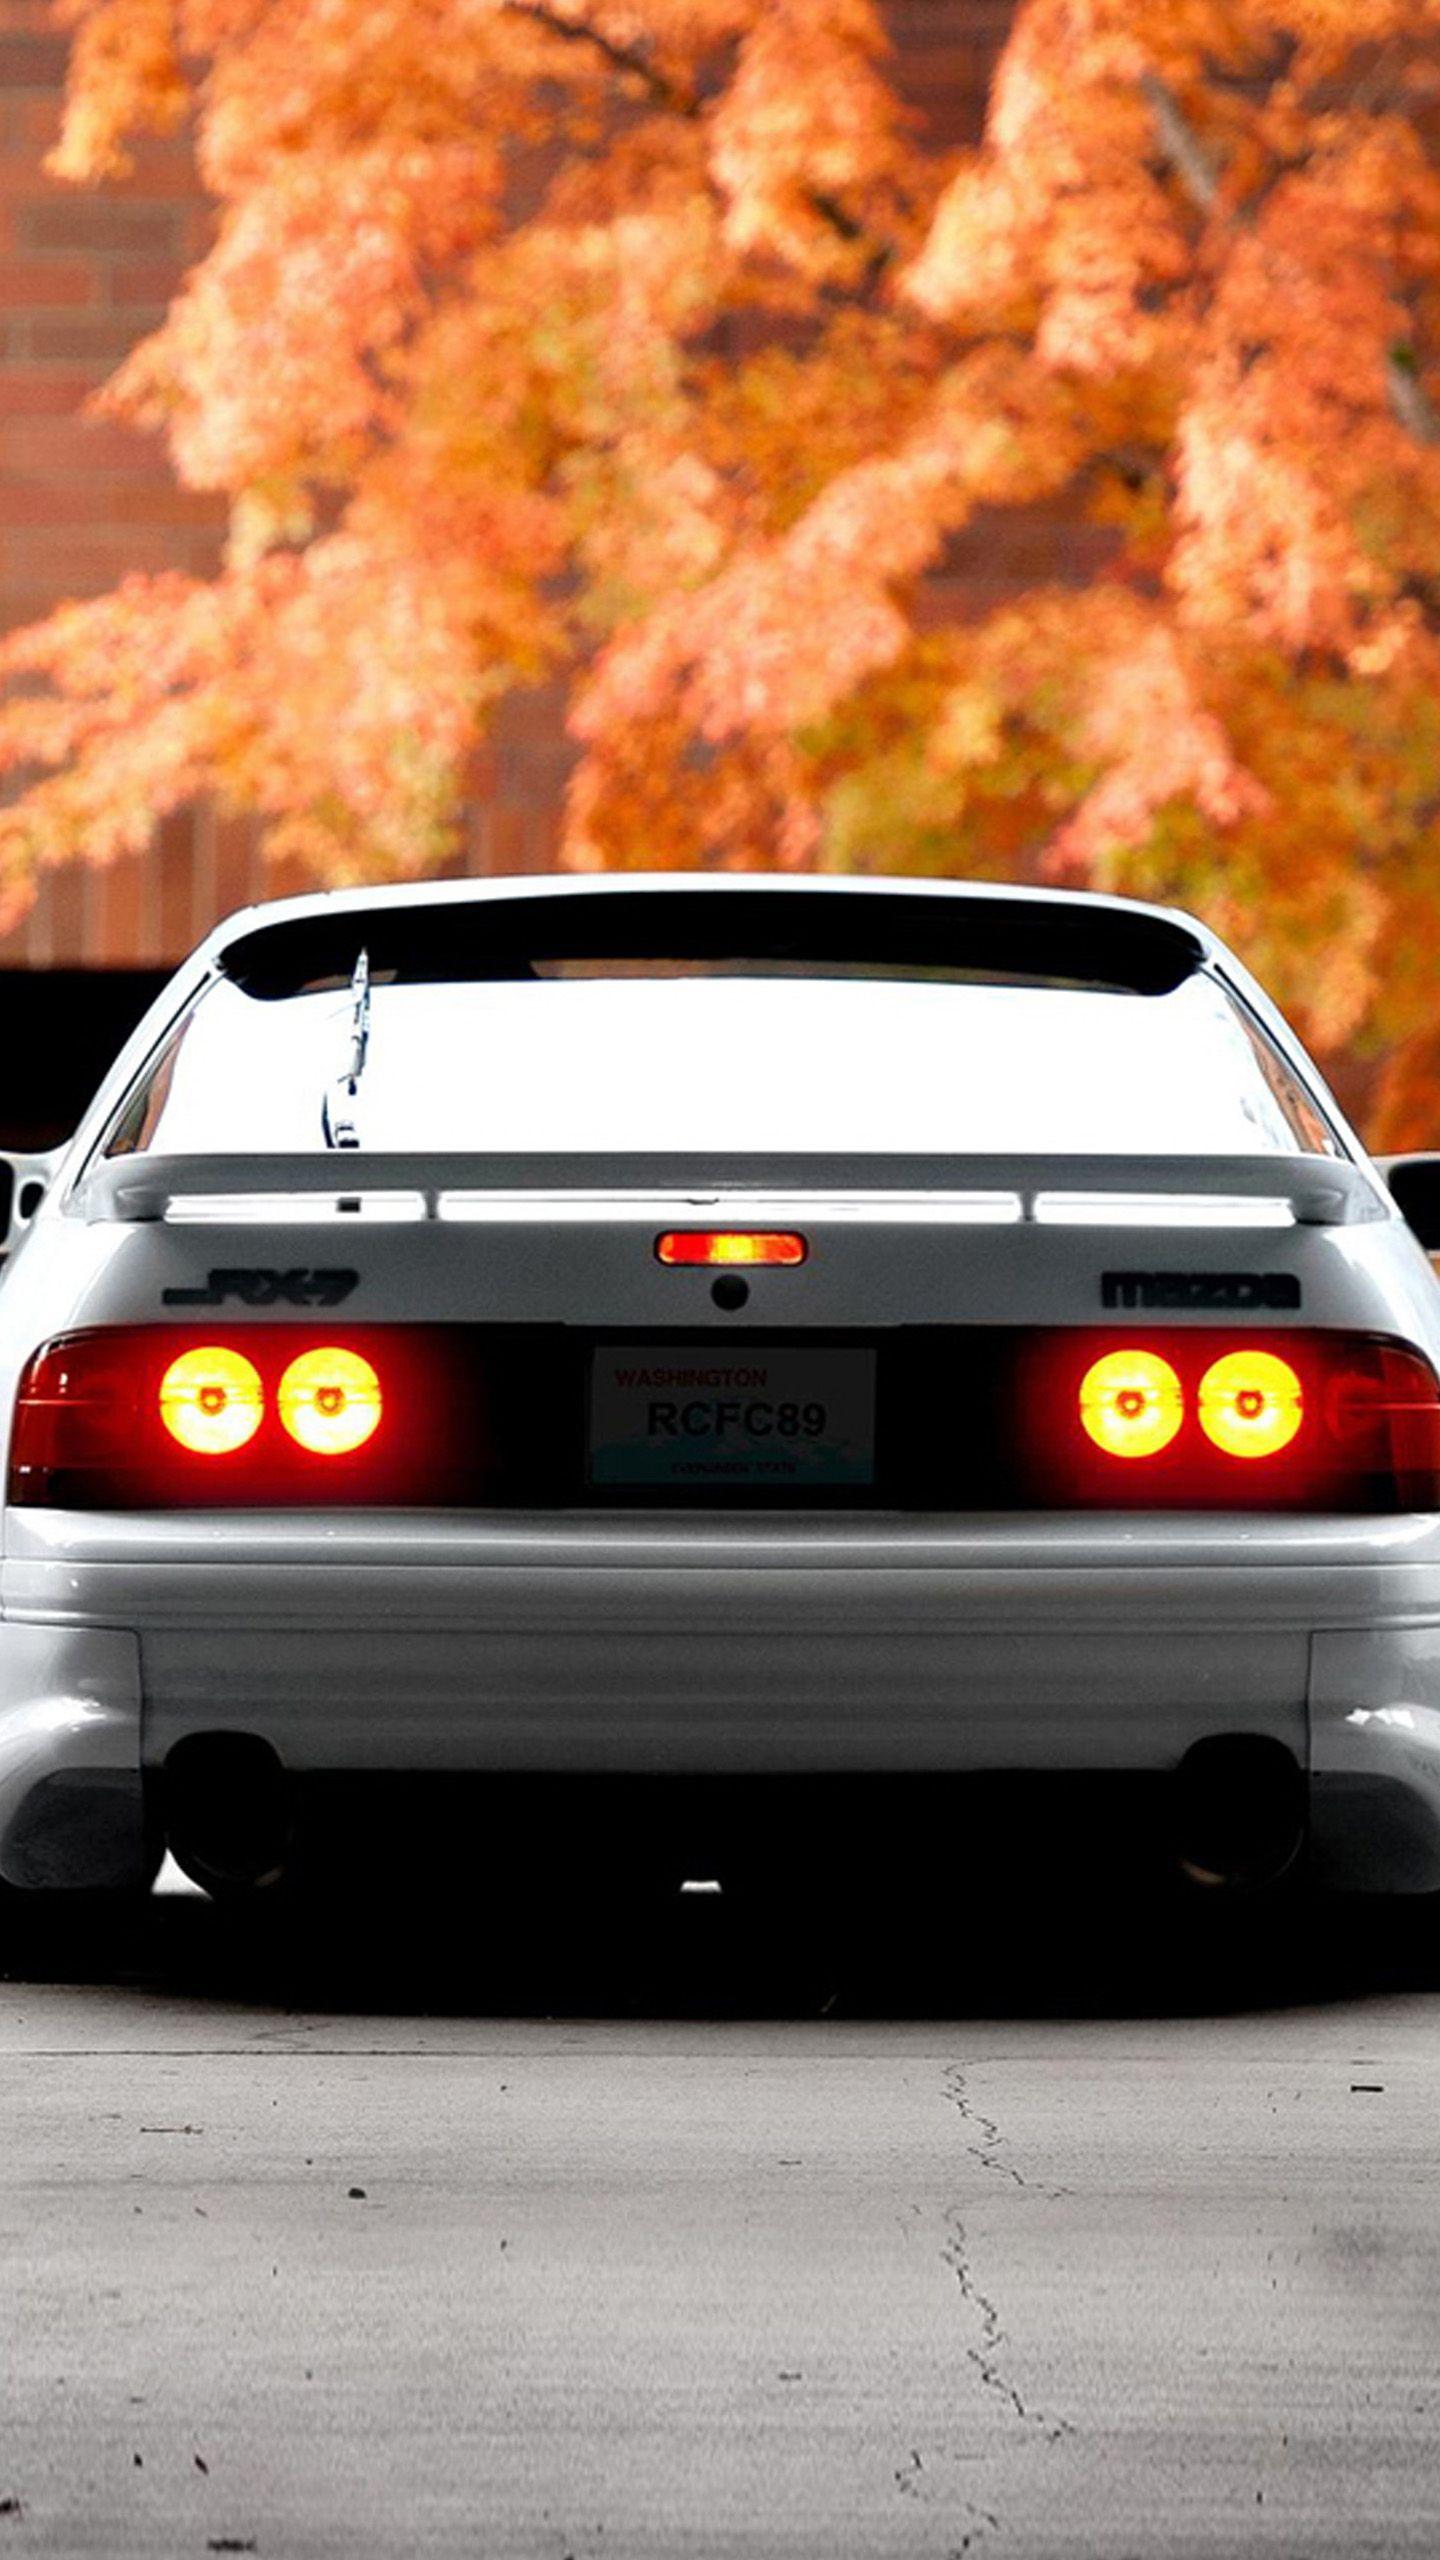 Rx7 Iphone Wallpapers Top Free Rx7 Iphone Backgrounds Wallpaperaccess